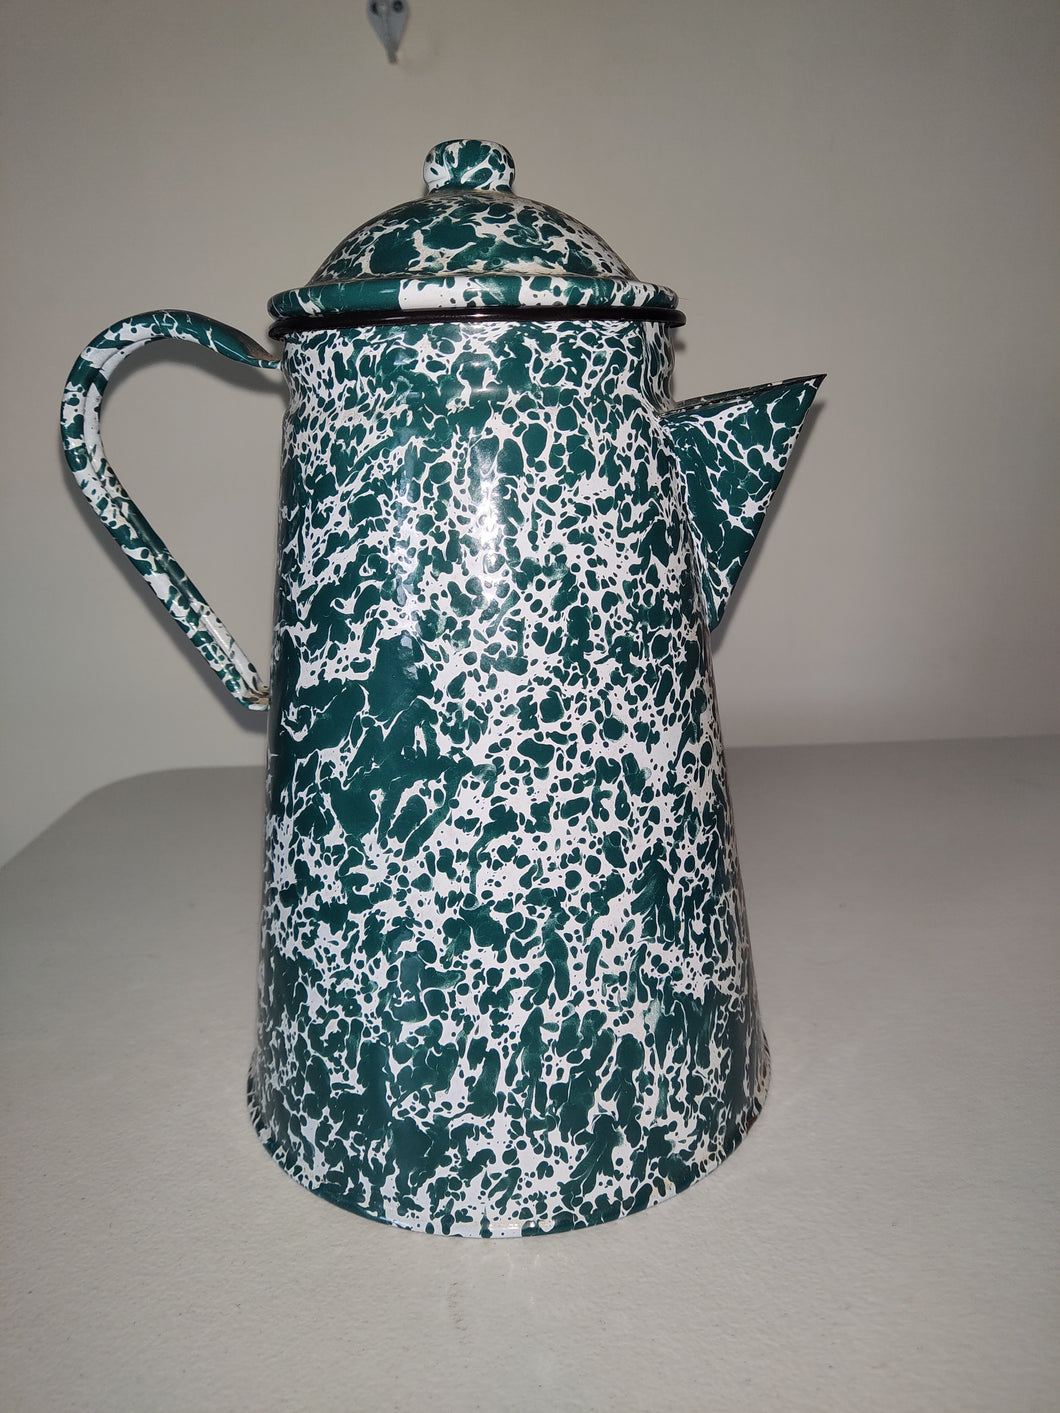 Vintage Green and White Marbled Swirl Metal Enamel Coffee Pot/Pitcher